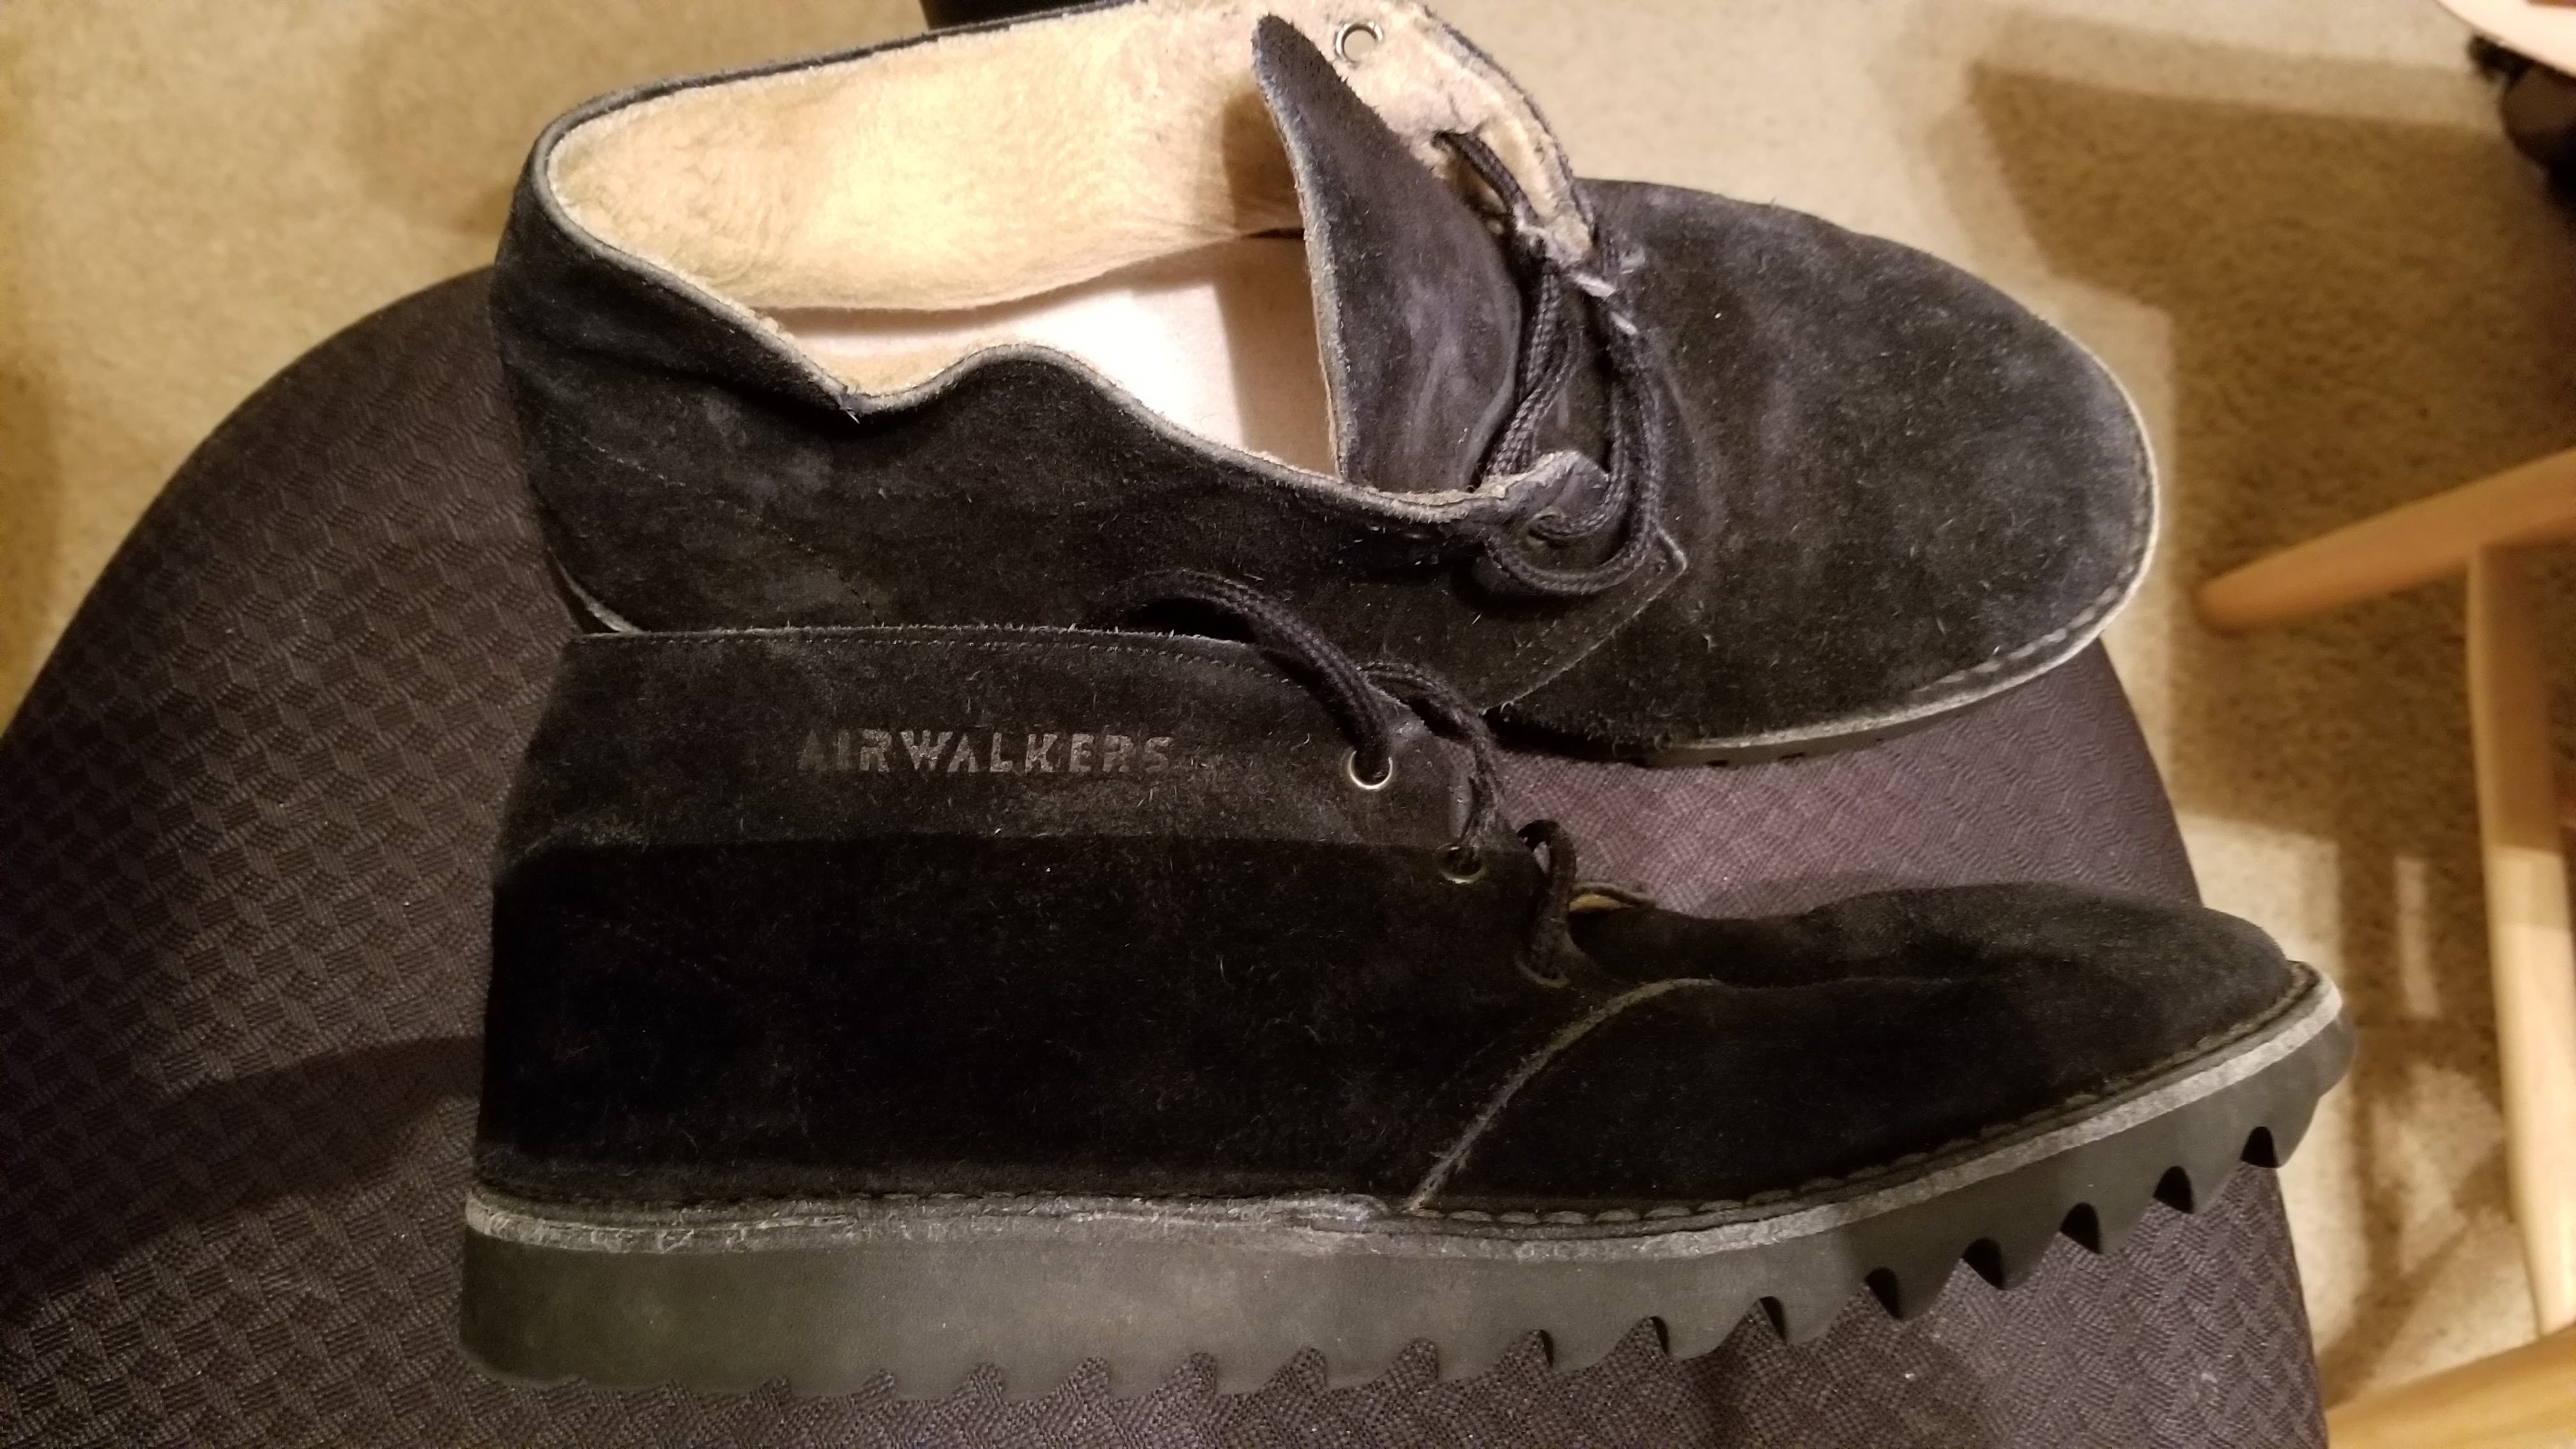 Help identfying some old airwalk shoes - Skate One Forum